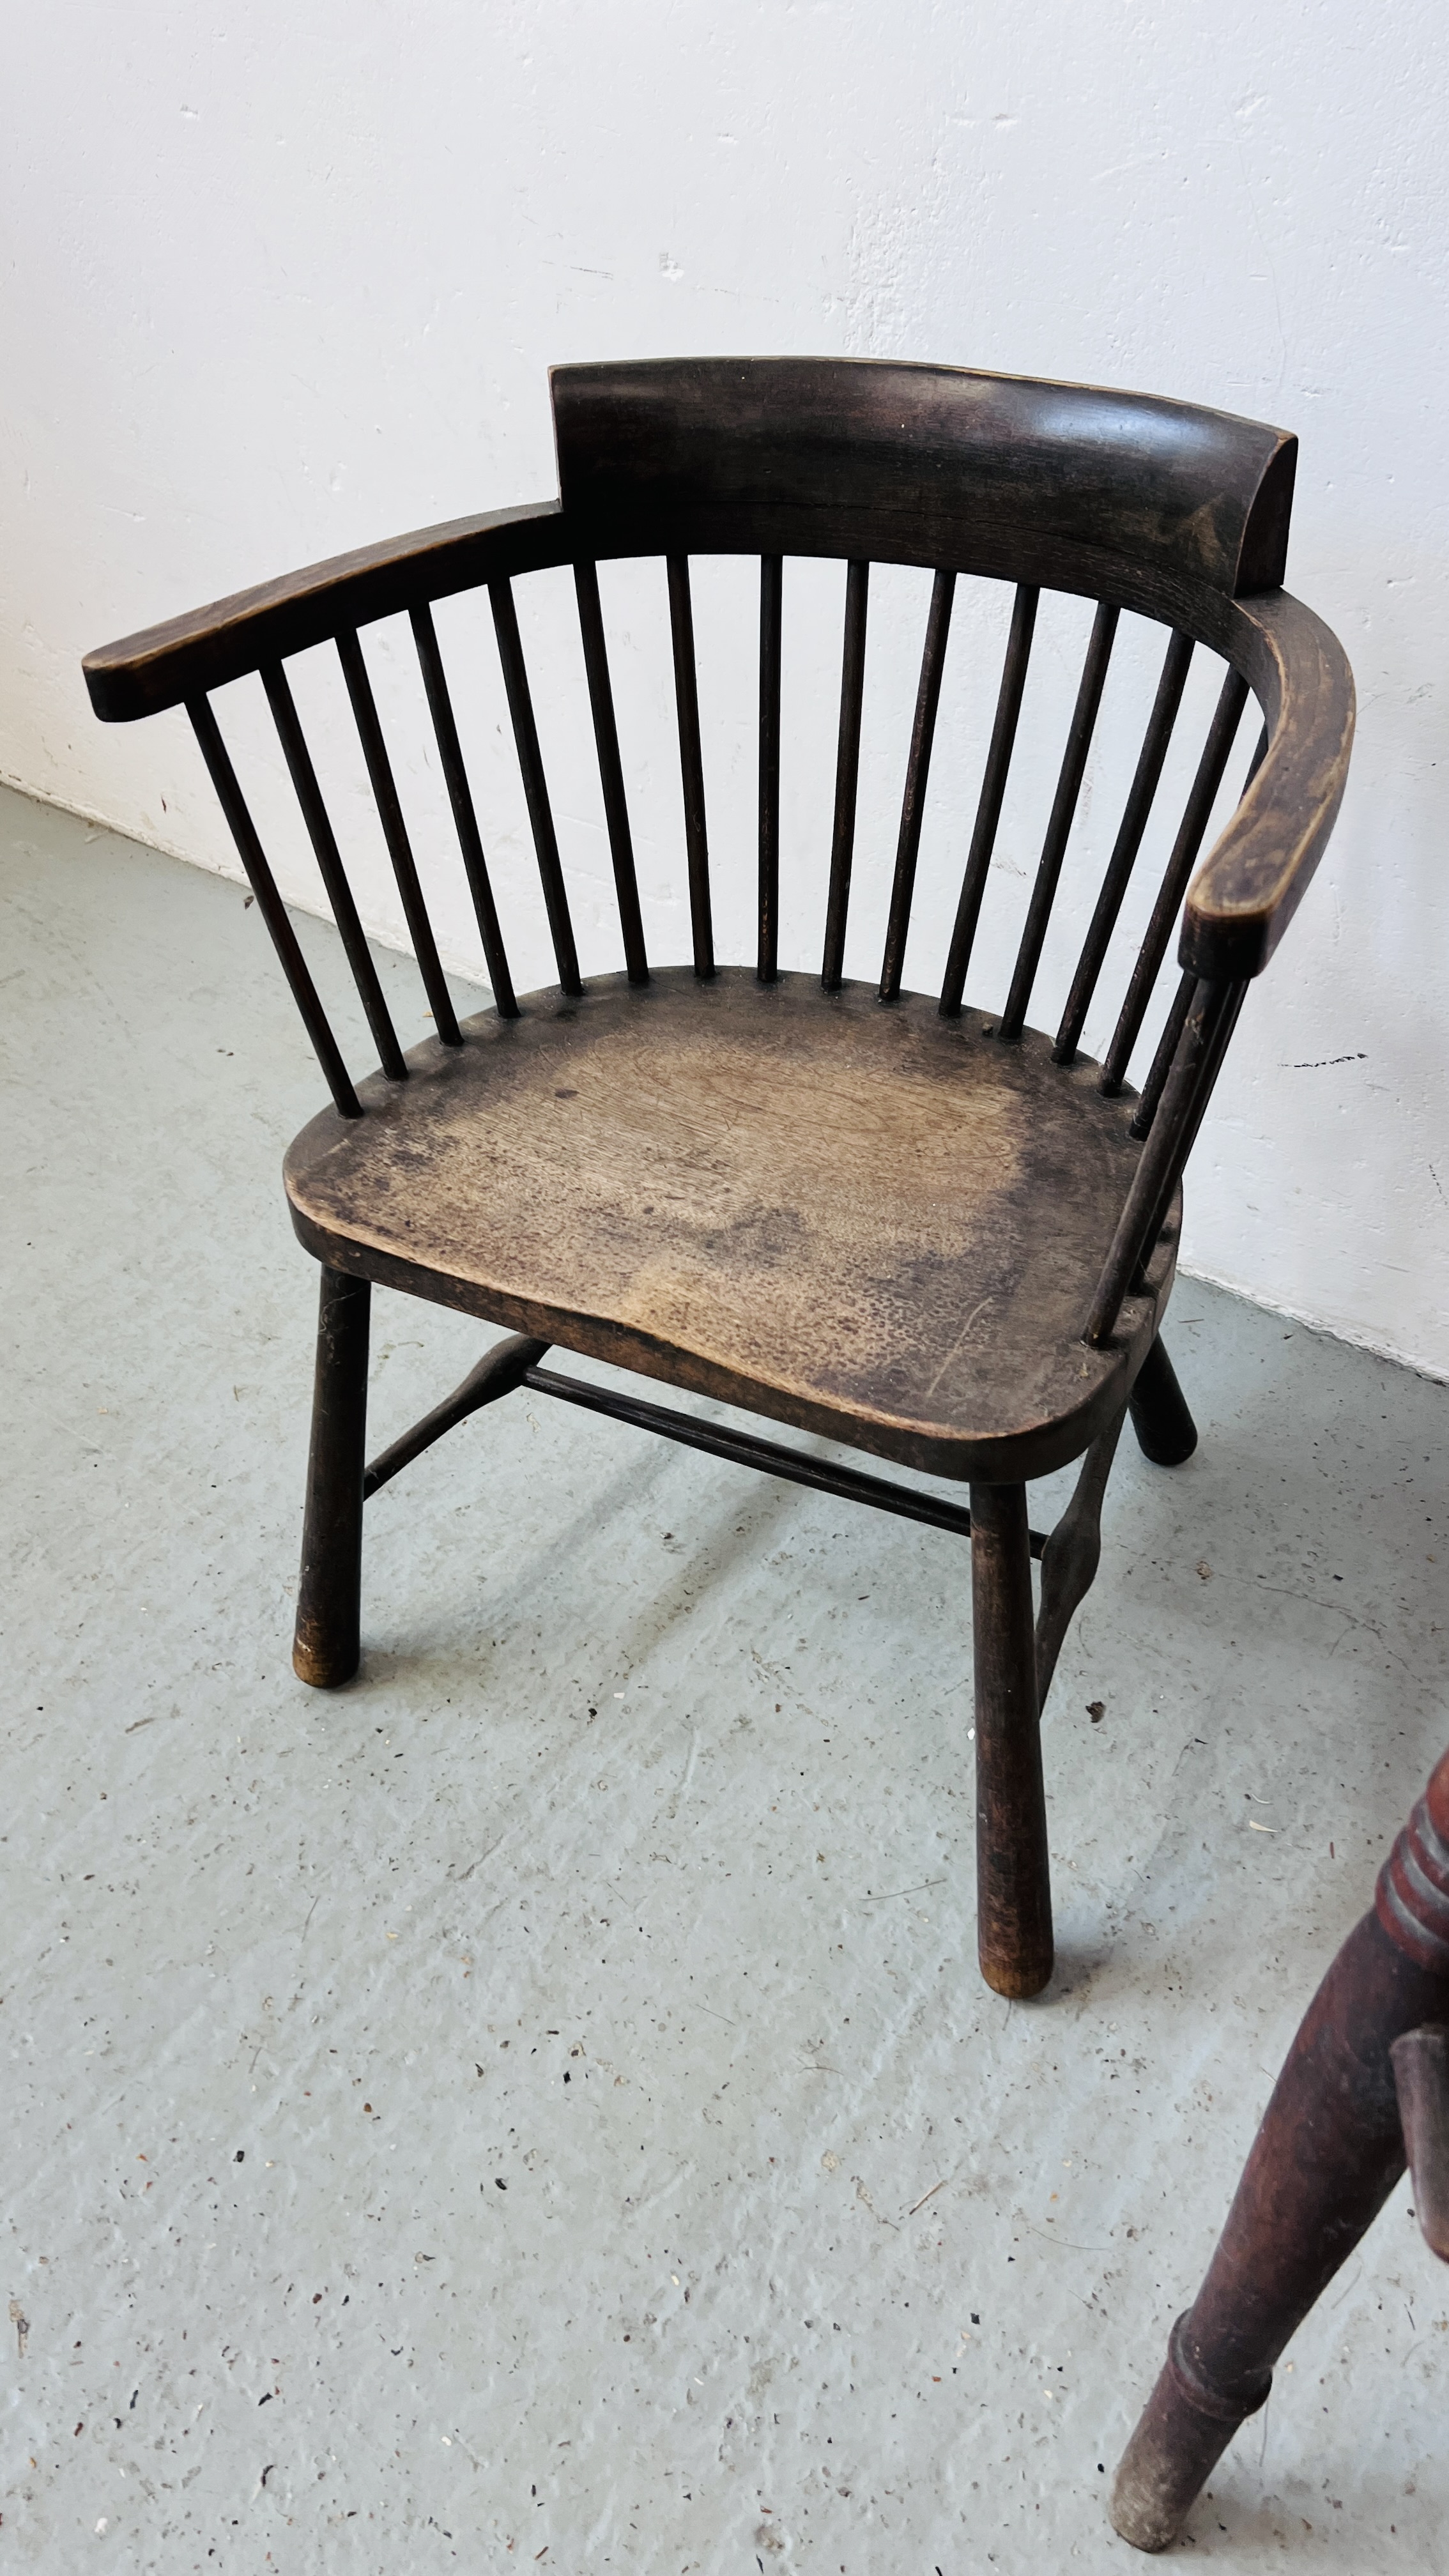 VINTAGE VICTORIAN HARDWOOD HIGHCHAIR ALONG WITH A LIBERTY STYLE CHILD'S CHAIR. - Image 4 of 8